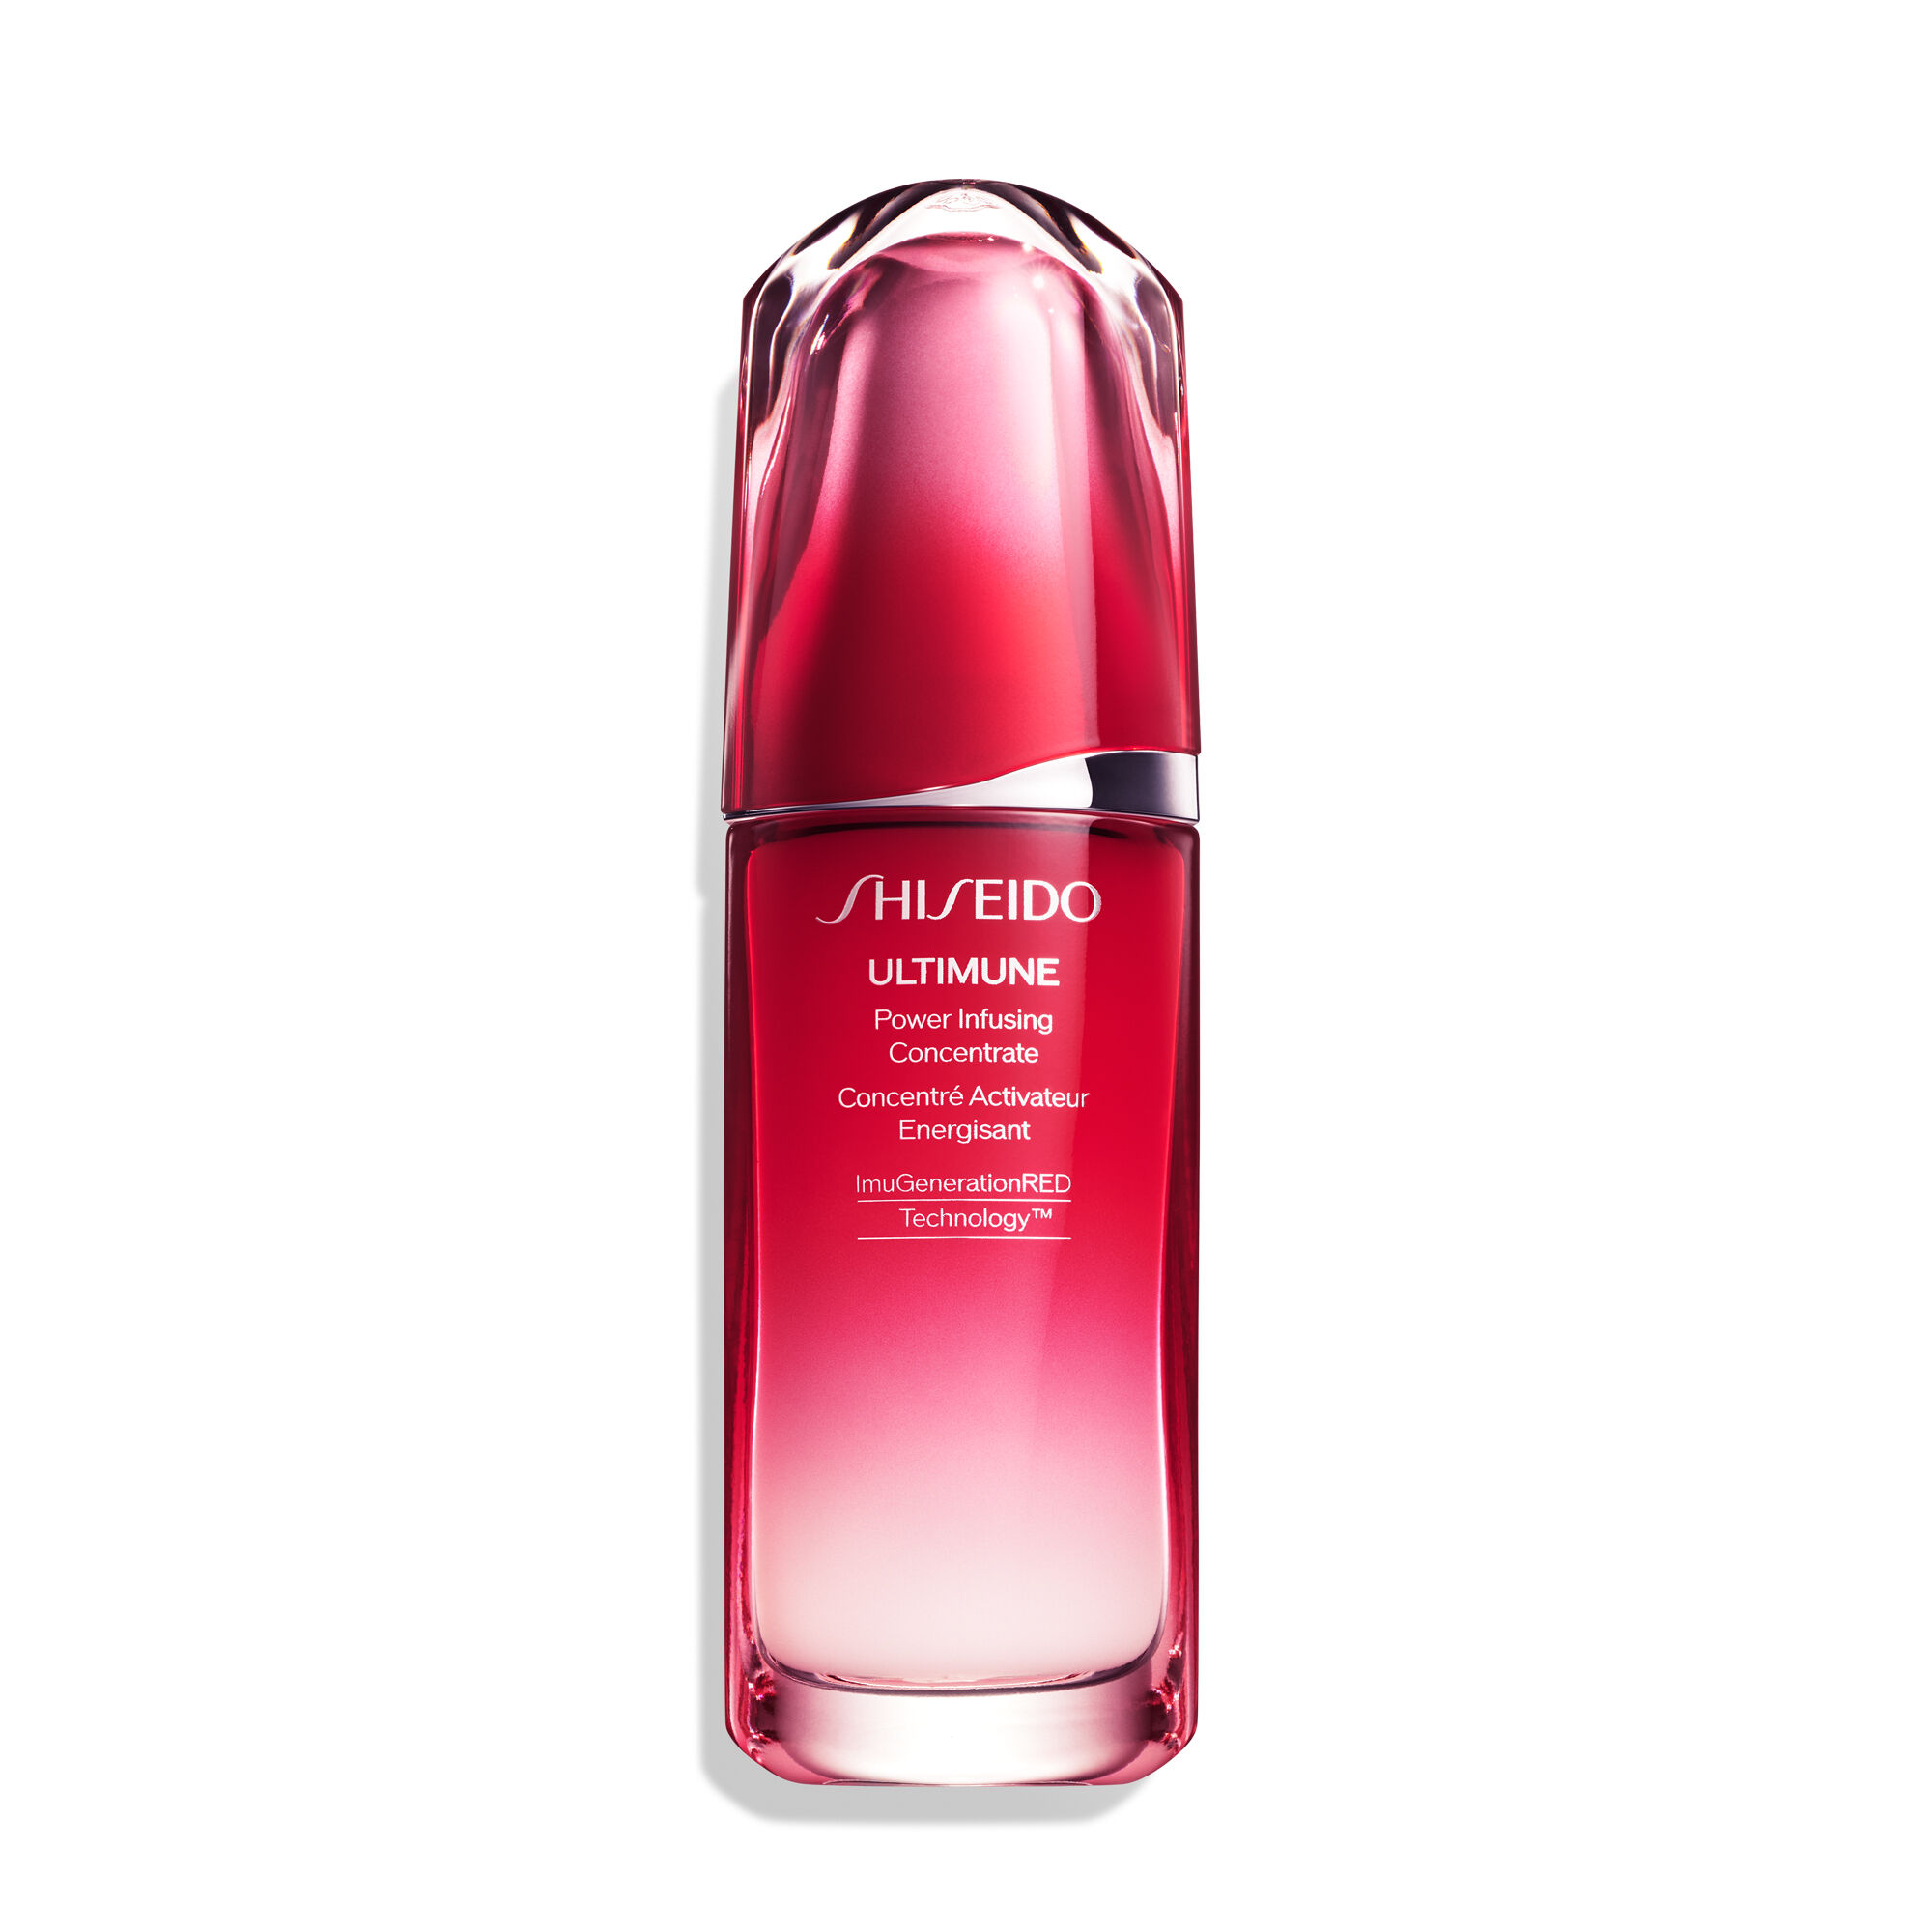 Shiseido Ultimune Power Infusing Concentrate 75ml - New Version